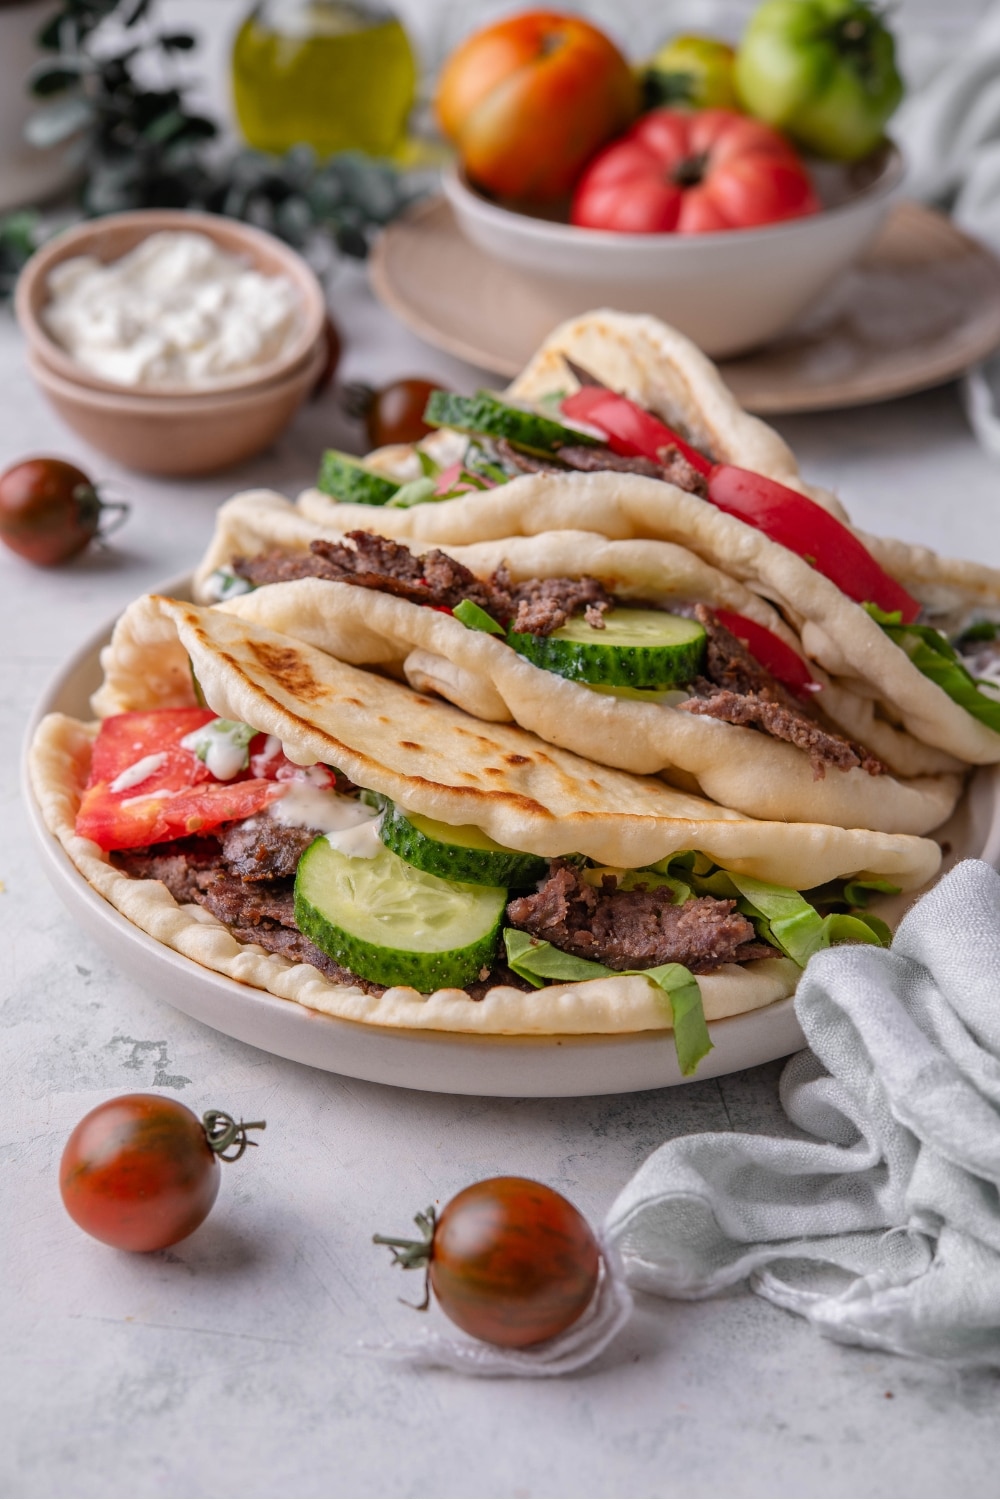 A gyro with tomato, cucumber, and sliced beef with two gyros behind them.